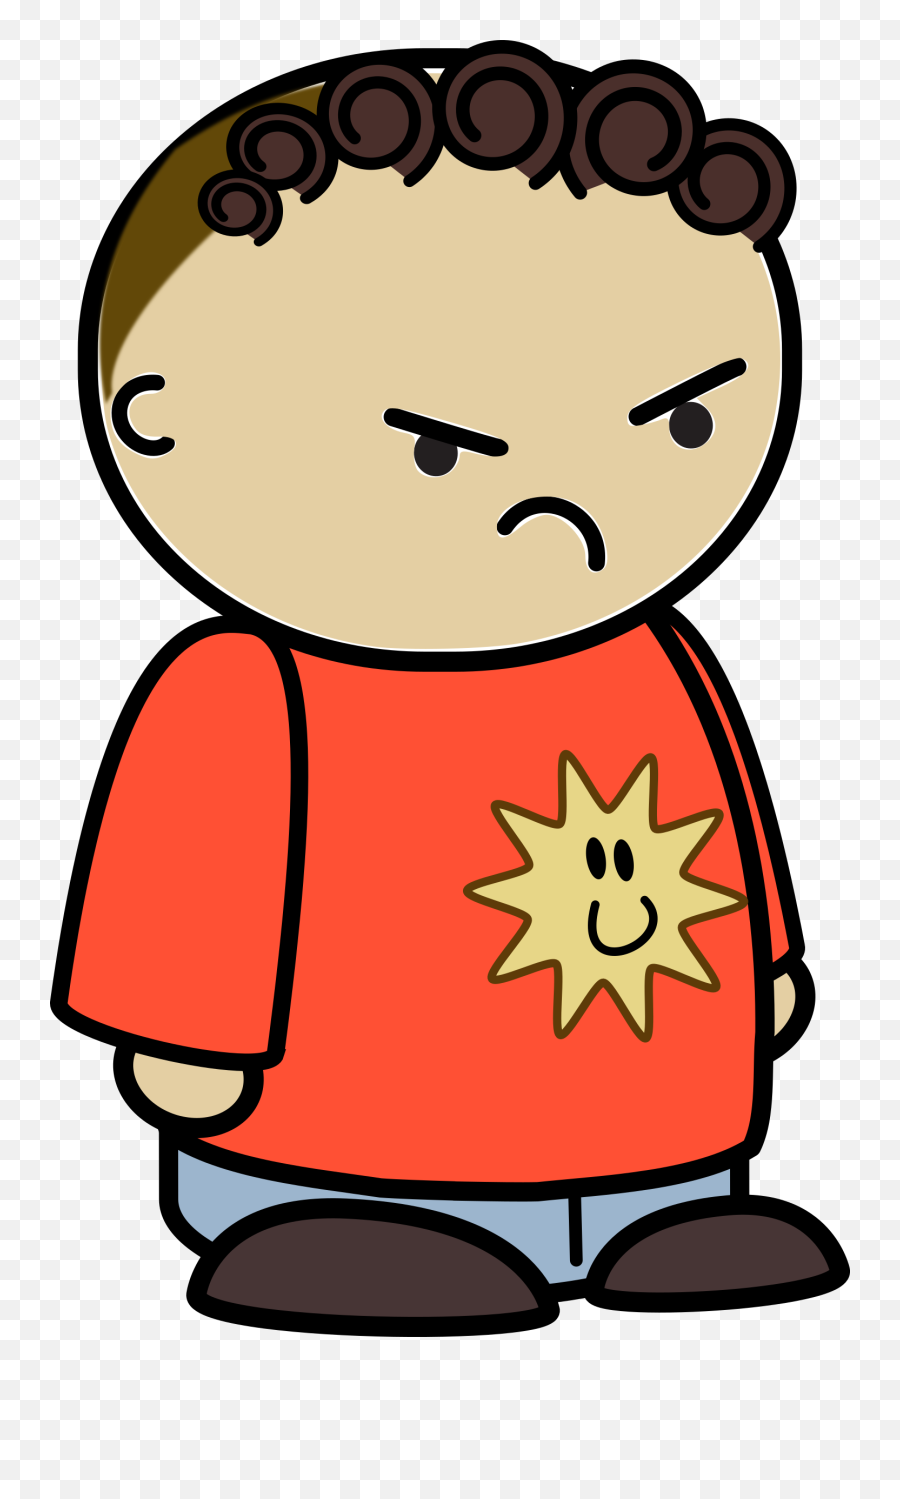 Curly Haired Boy In A Orange Shirt Sad Face To The Side Emoji,Sad Emoticon Clip Art